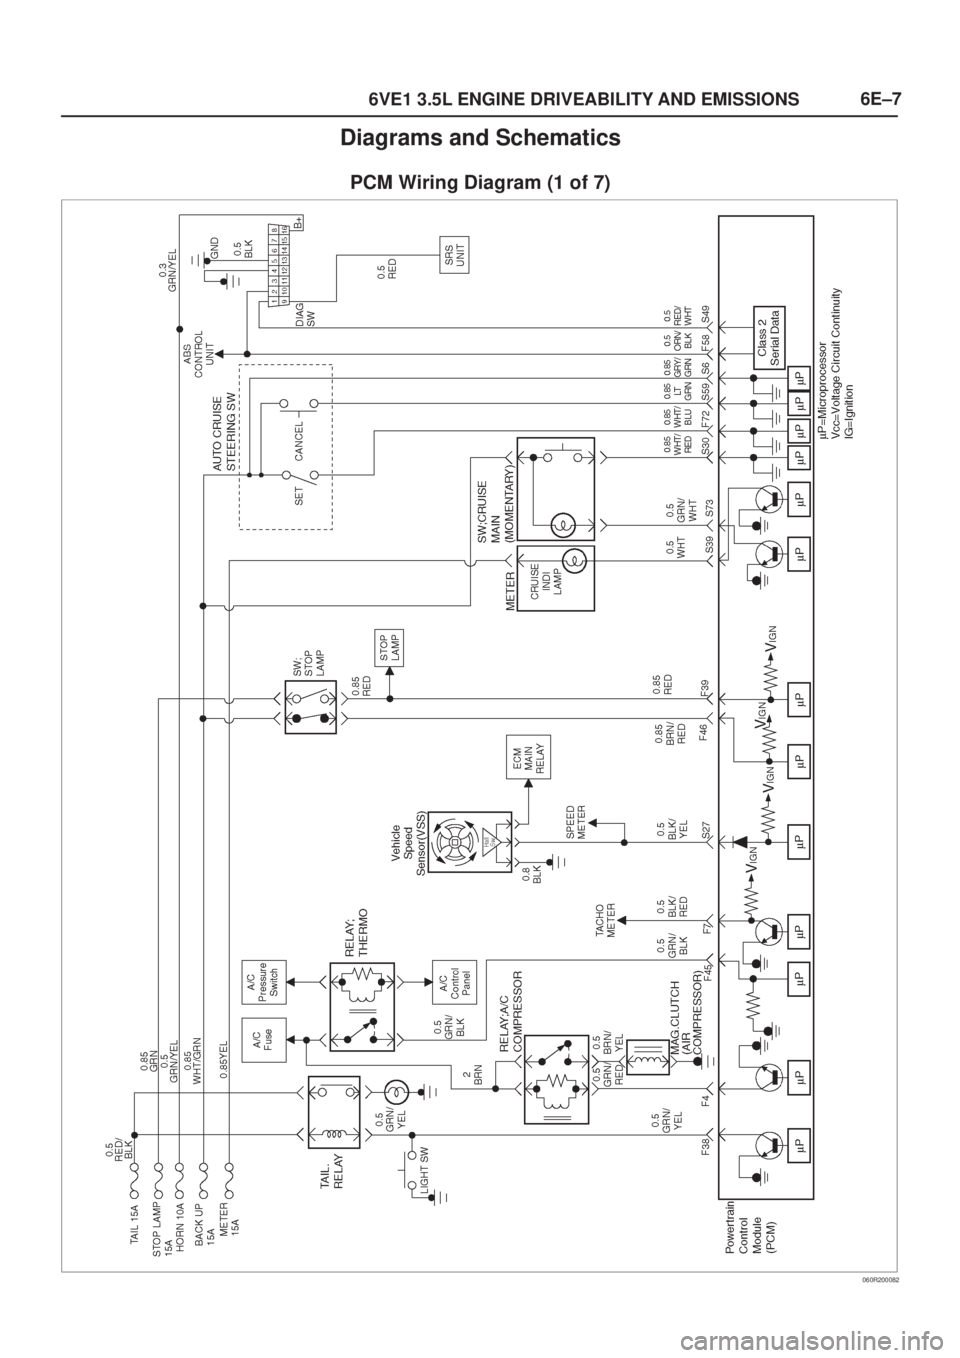 ISUZU AXIOM 2002  Service Repair Manual 6E±7
6VE1 3.5L ENGINE DRIVEABILITY AND EMISSIONS
Diagrams and Schematics
PCM Wiring Diagram (1 of 7)
060R200082 